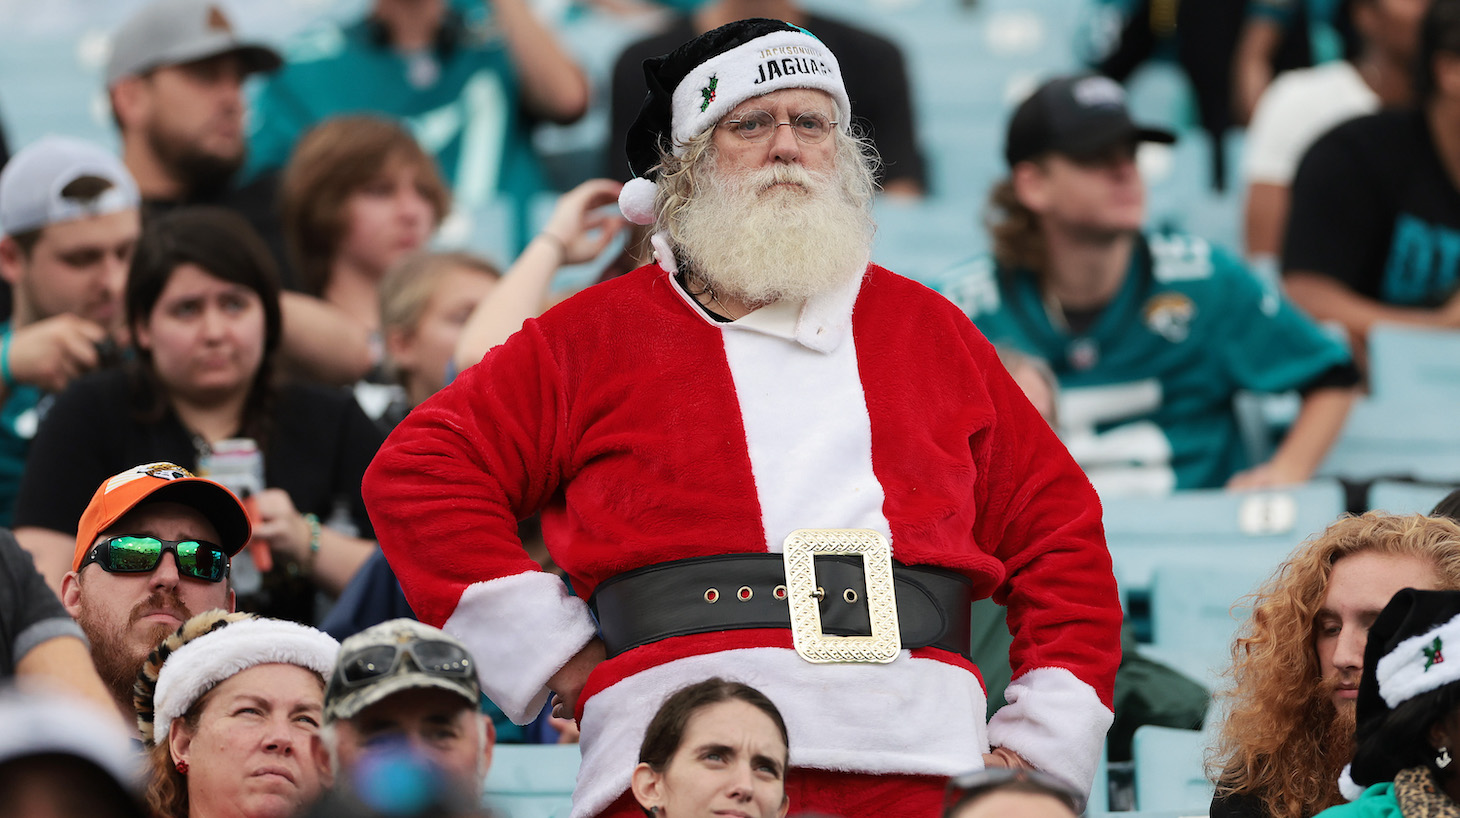 JACKSONVILLE, FLORIDA - DECEMBER 19: A Jacksonville Jaguars fan dressed as Santa Claus in the stands in the game against the Houston Texans at TIAA Bank Field on December 19, 2021 in Jacksonville, Florida. (Photo by Douglas P. DeFelice/Getty Images)